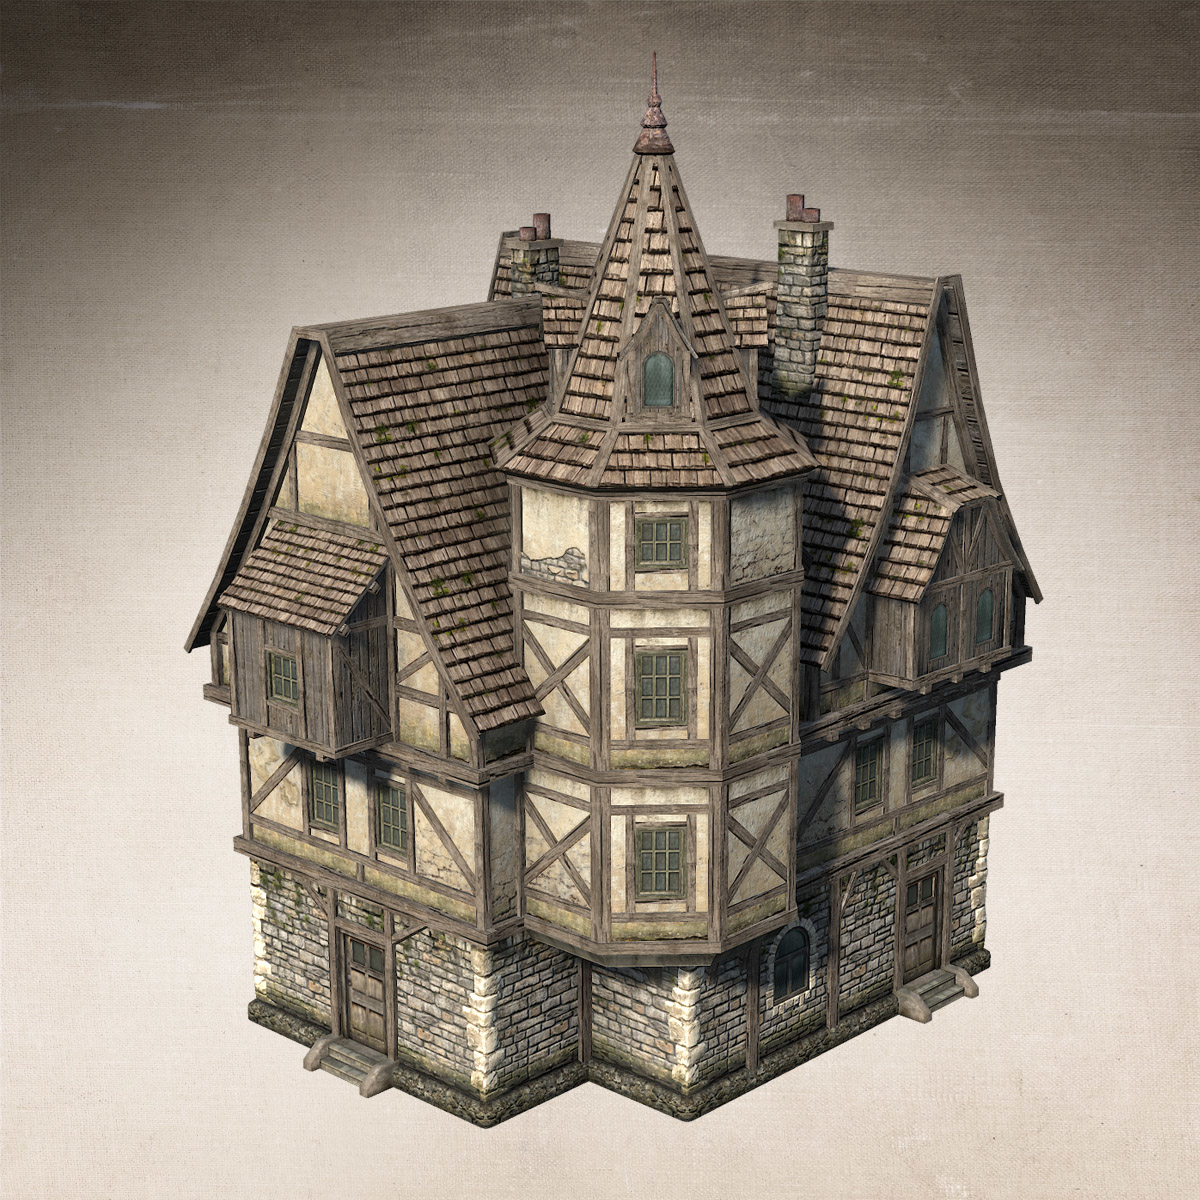 3ds fantasy medieval house